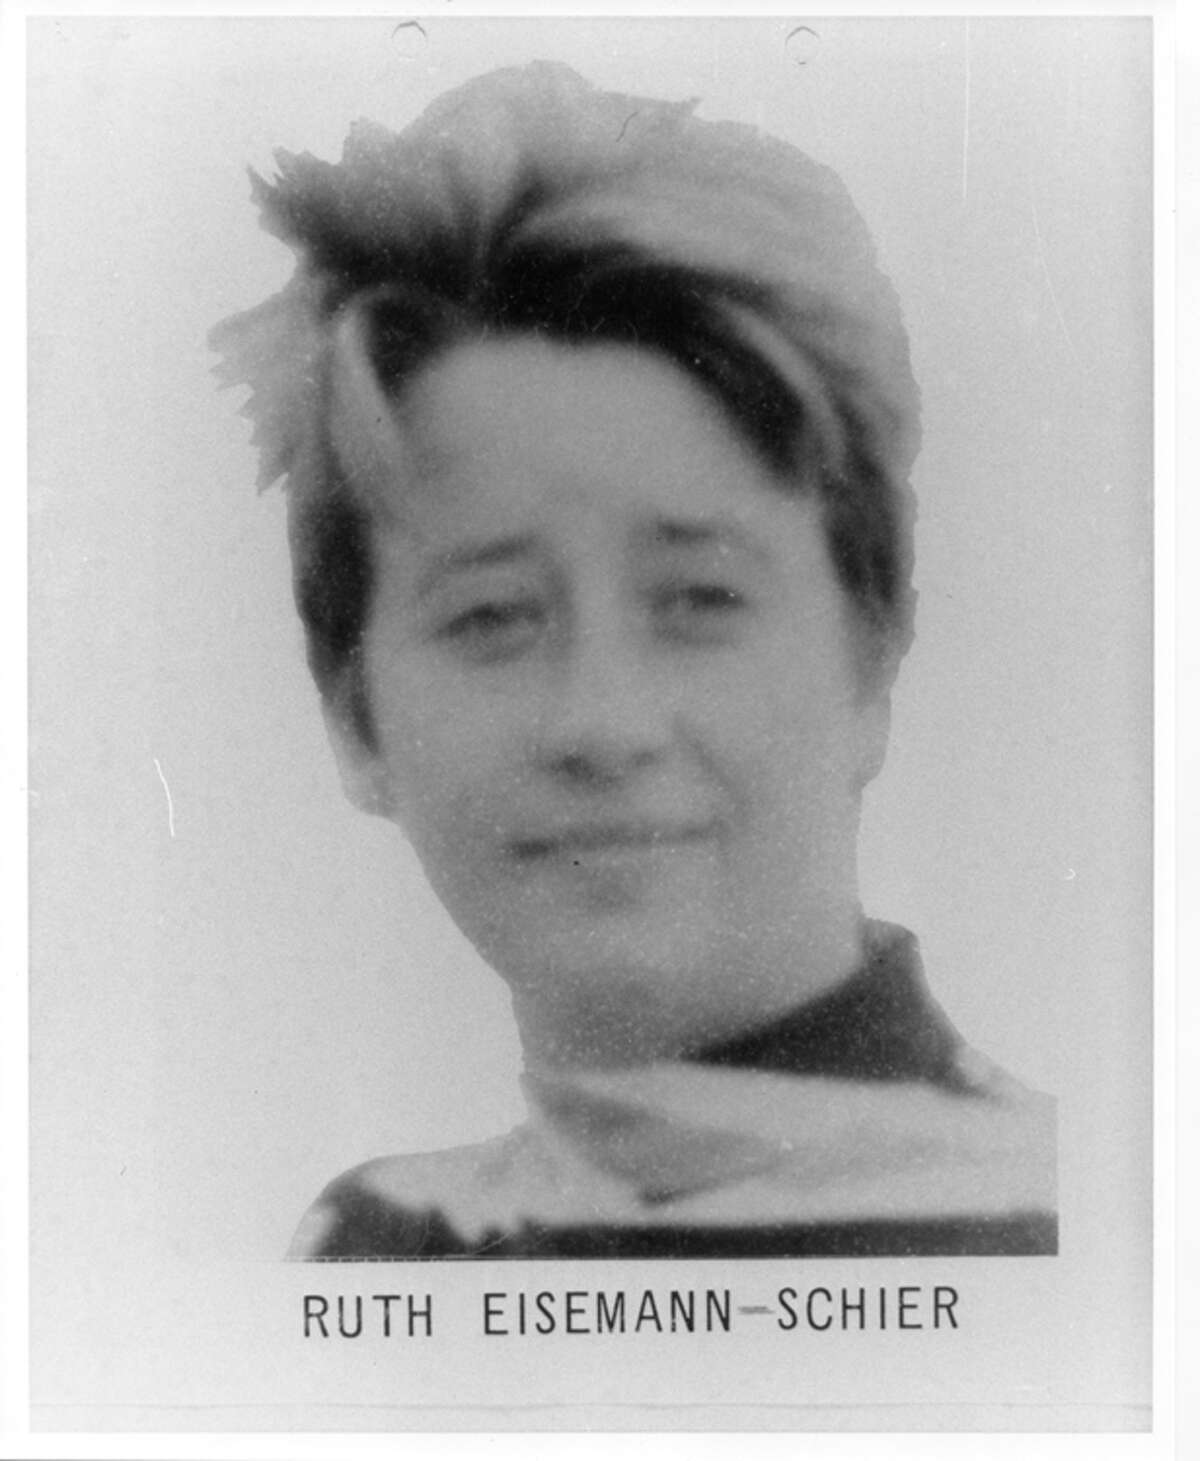 Ruth Eisemann-Schier Eisemann-Schier was the first woman put on the list on December 28, 1968. She and an accomplice kidnapped a wealthy real estate's developer's daughter and held her for ransom in Atlanta. She was apprehended March 5, 1969 in Oklahoma.